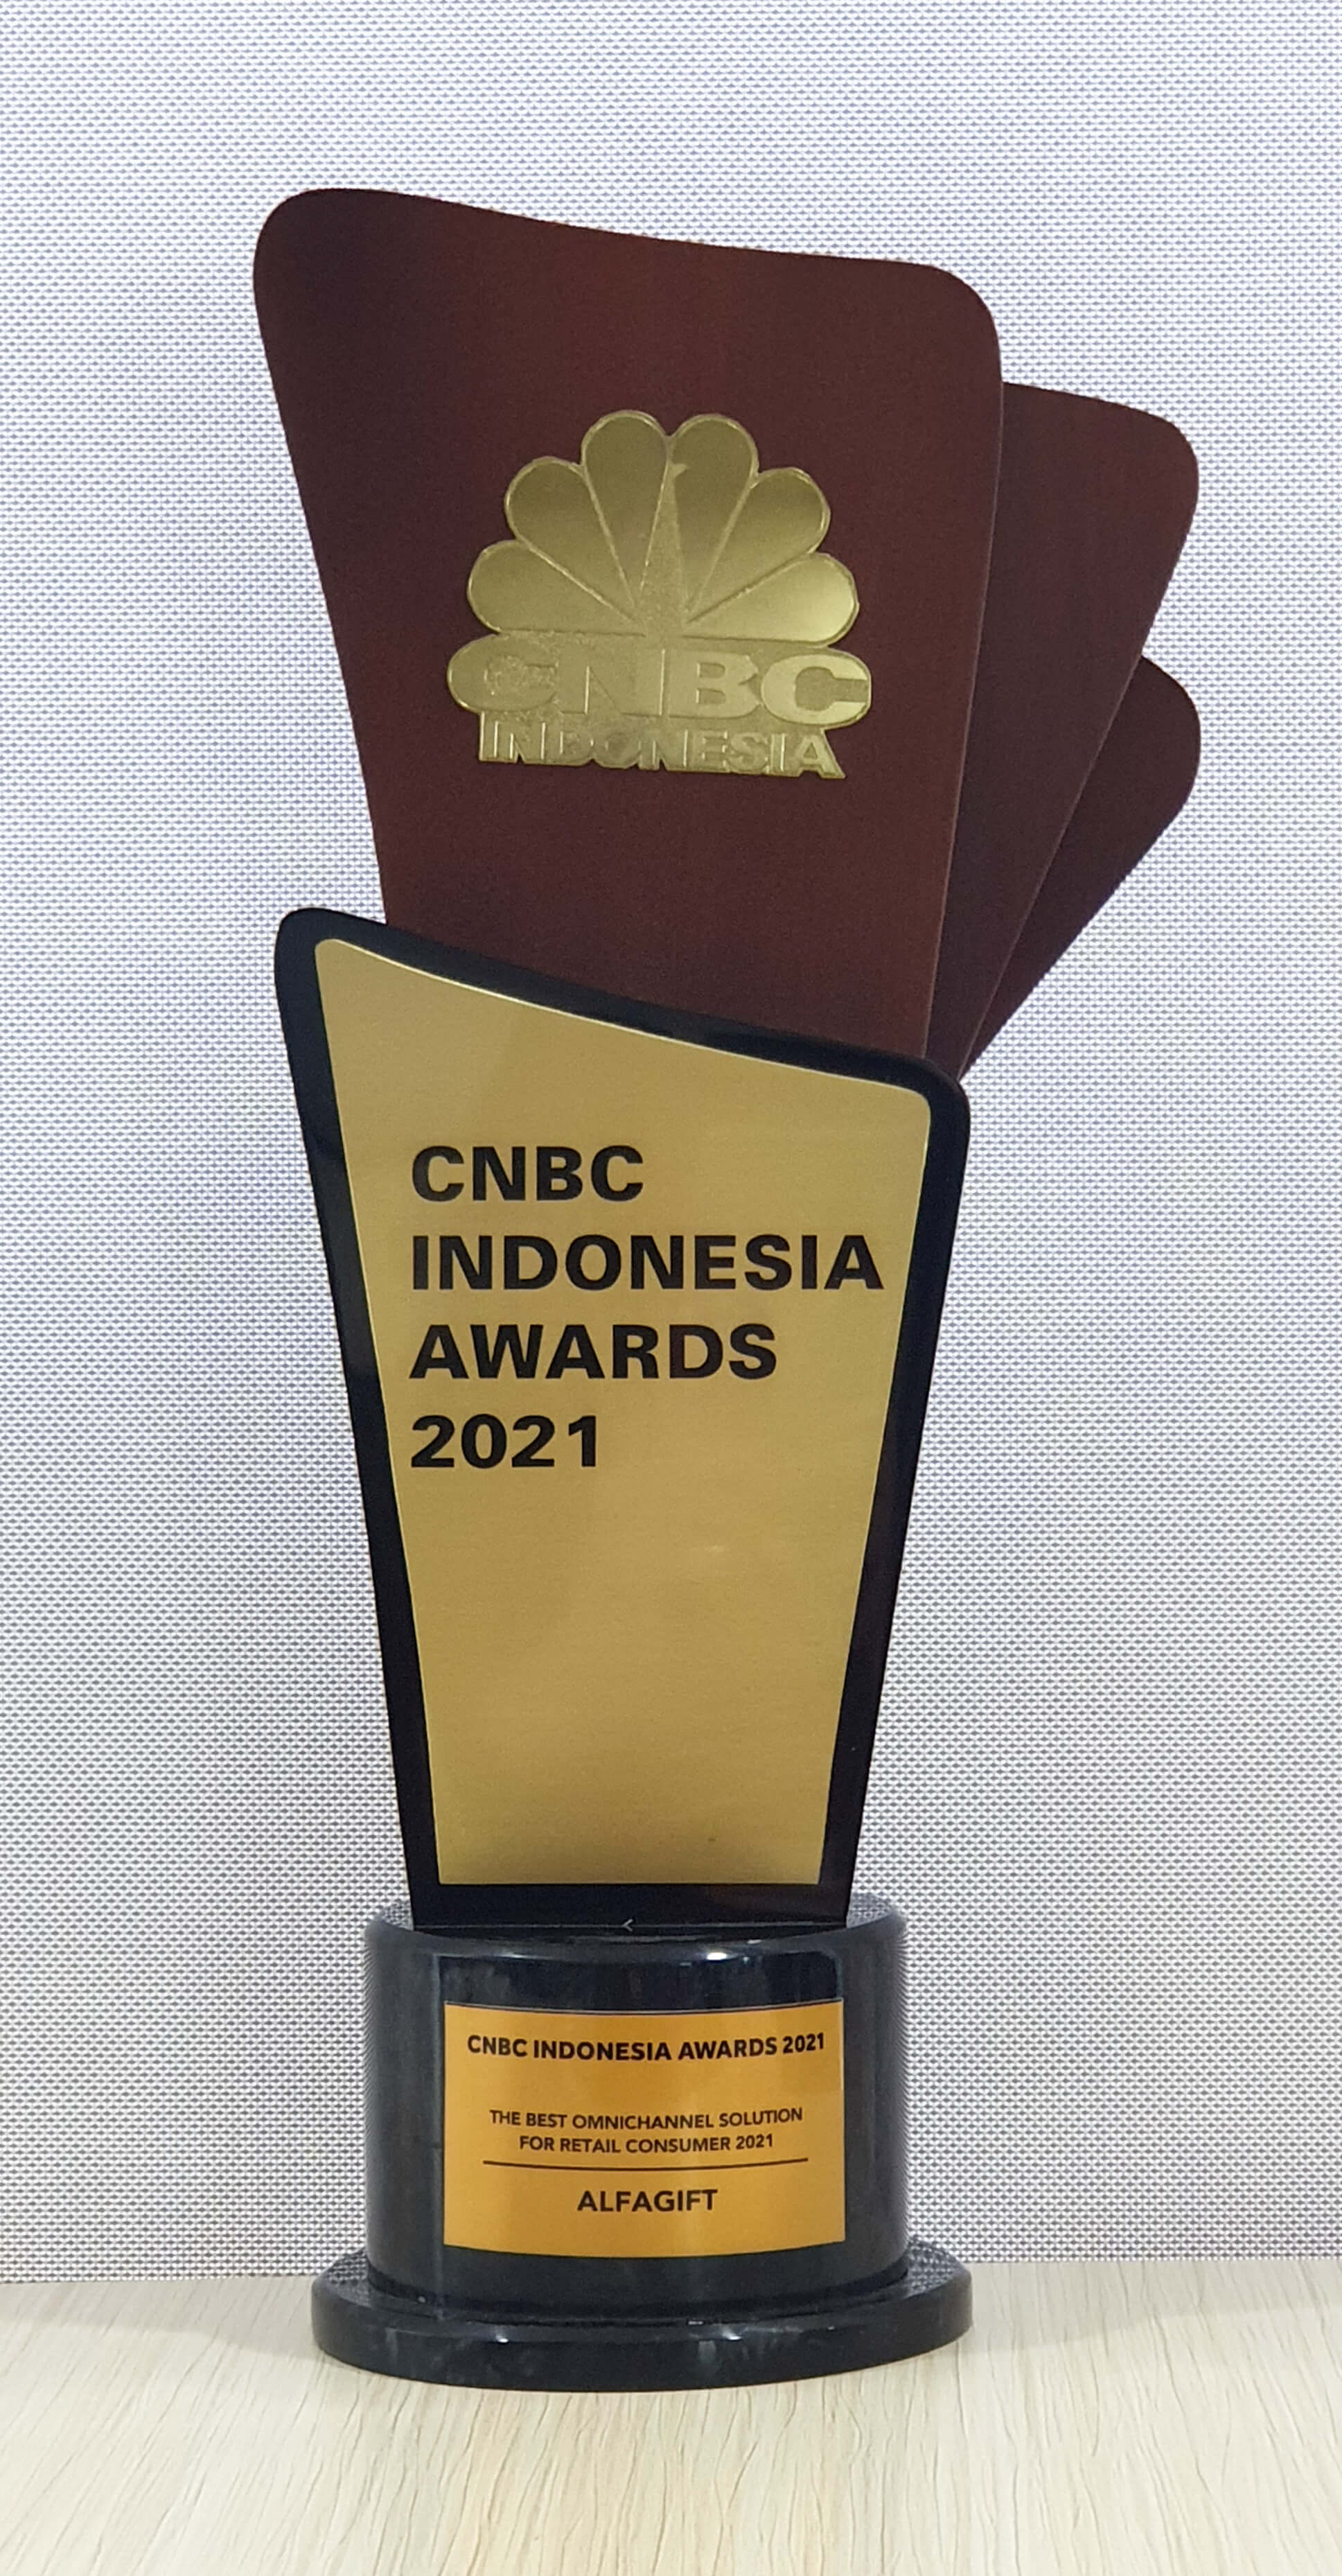 Image reward CNBC INDONESIA AWARDS 2021, the Best Omnichannel for Retail Consumer 2021